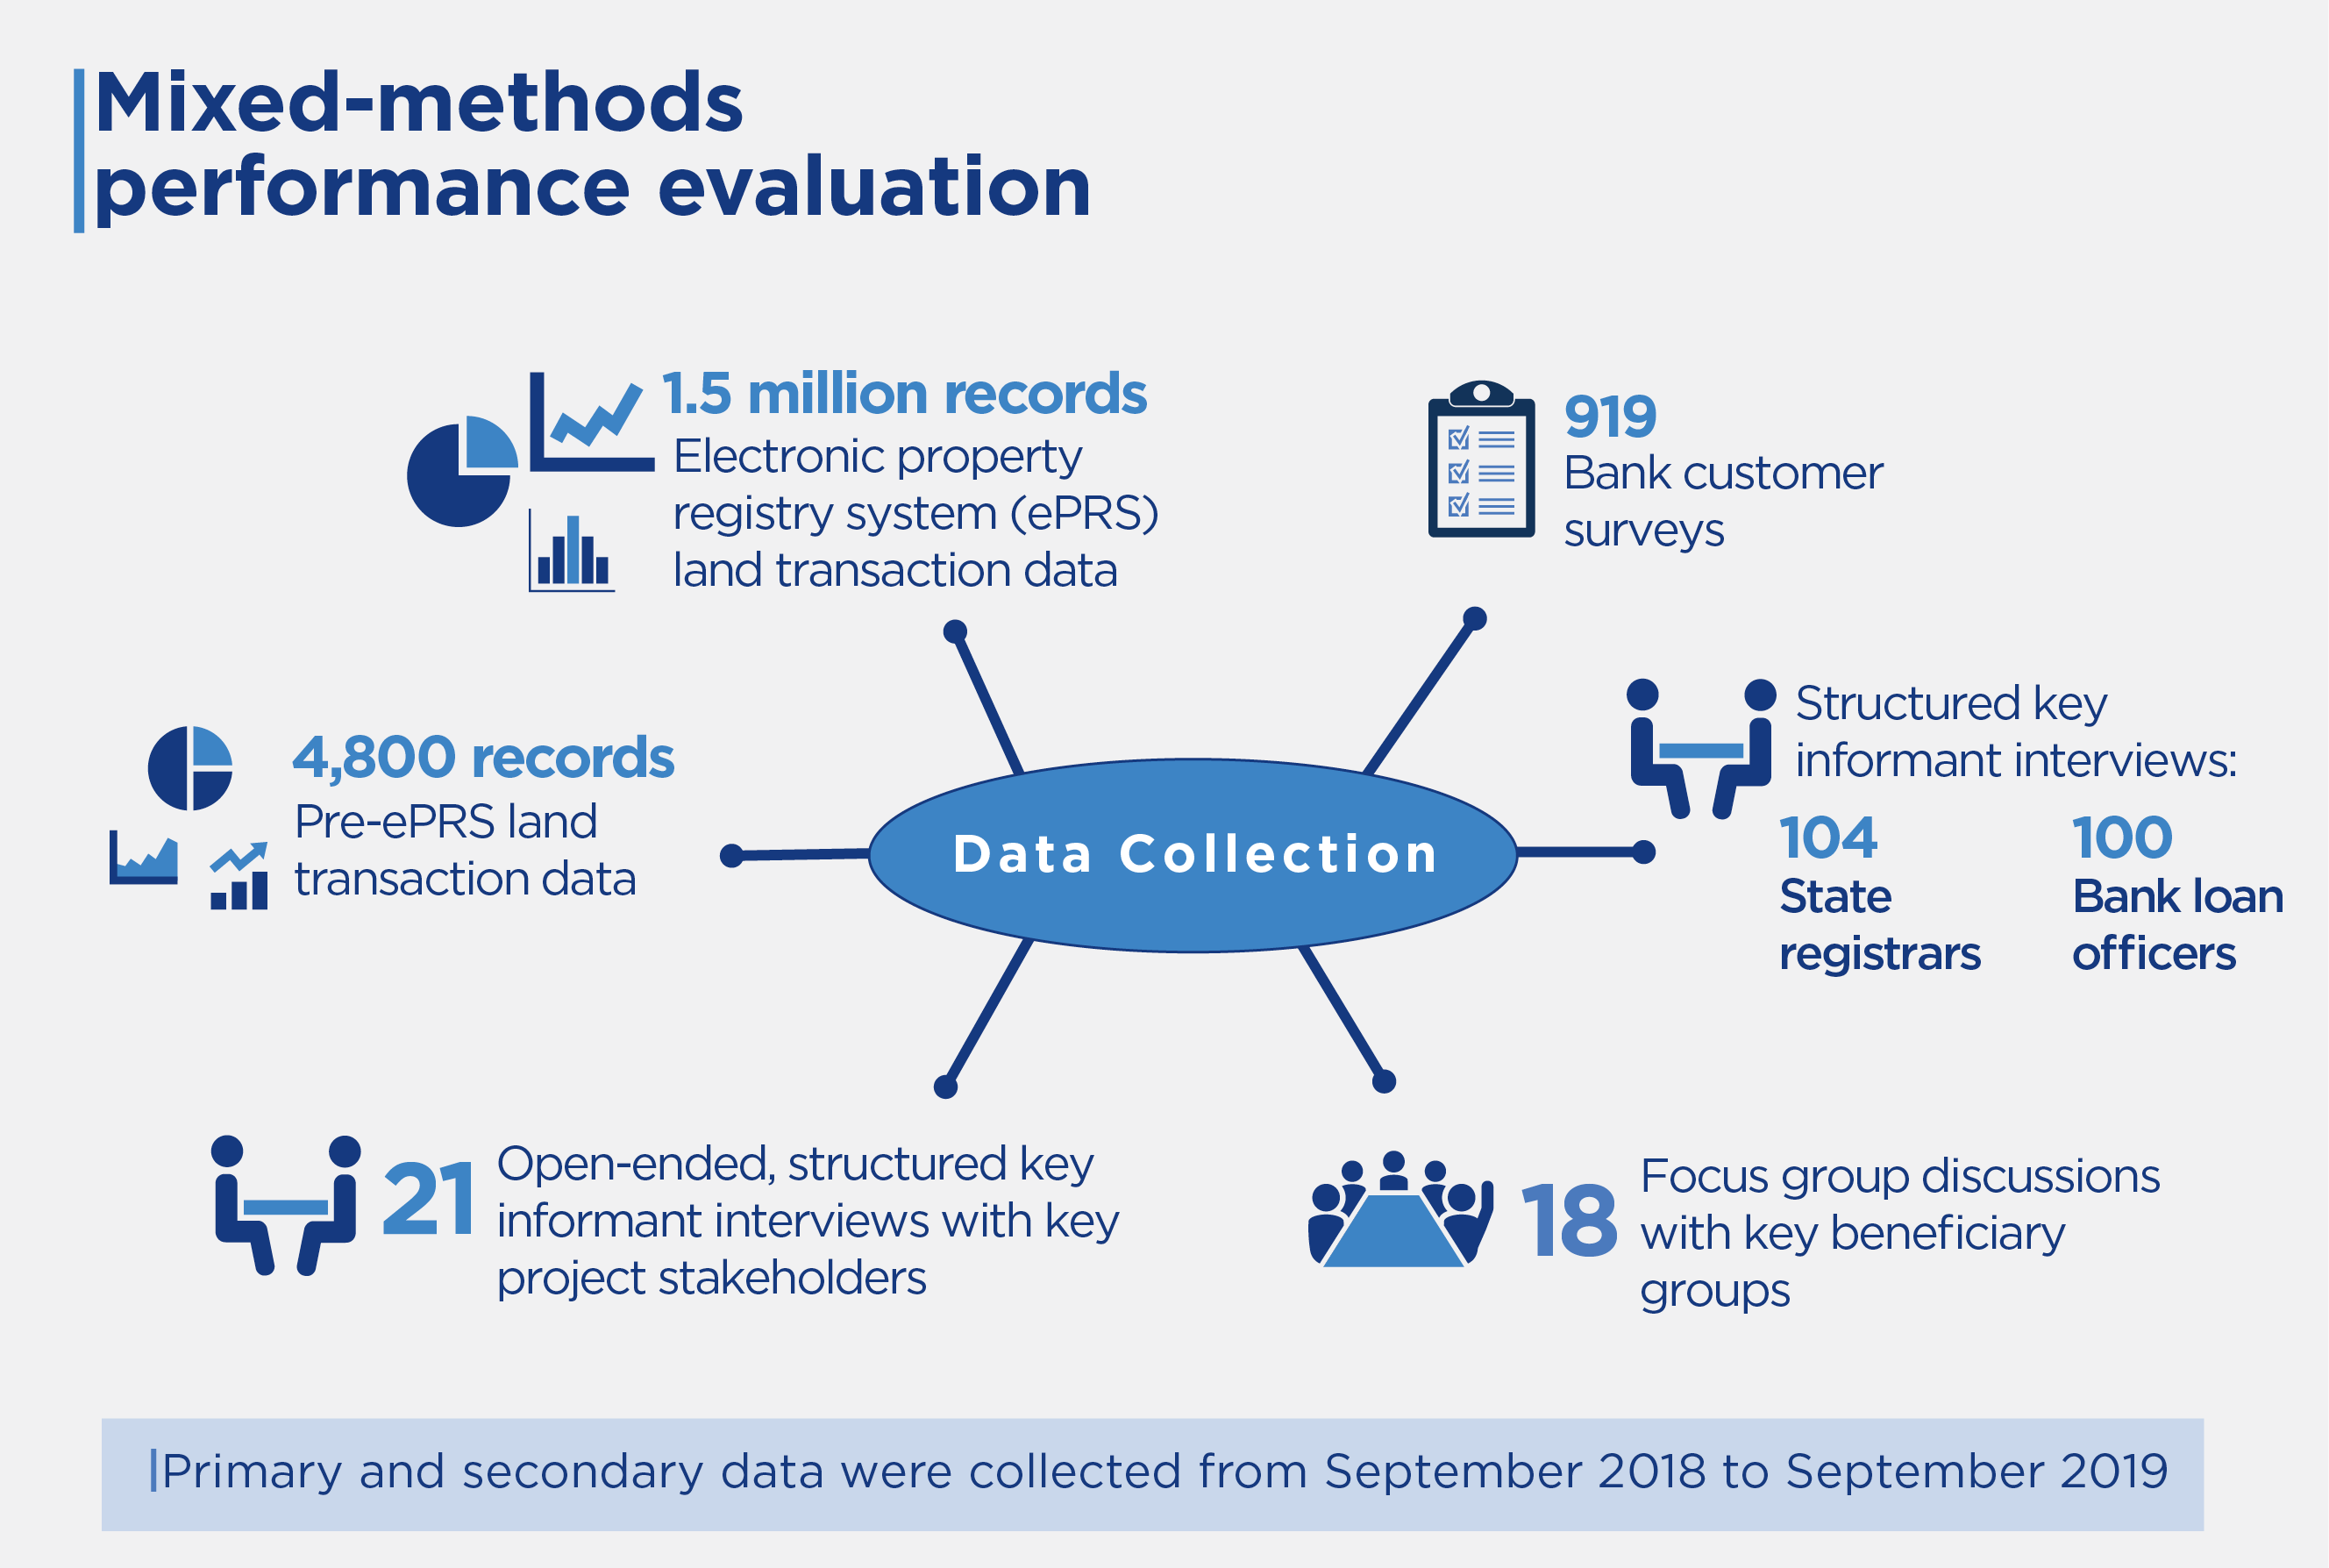 Evaluation methodology and data collection details